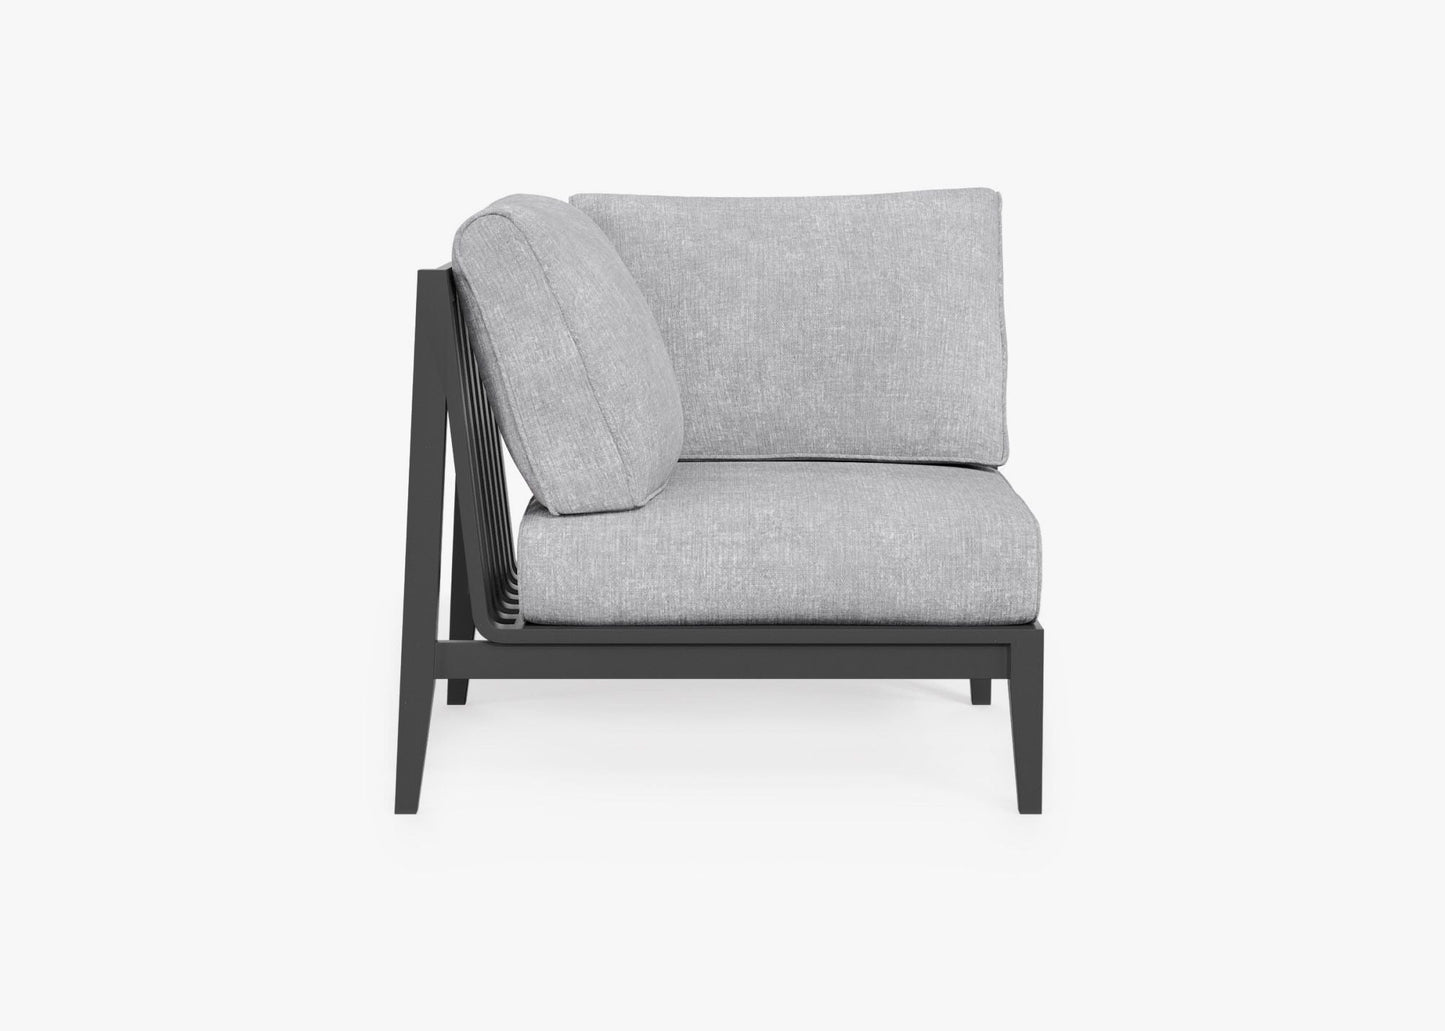 Live Outer 35" Charcoal Aluminum Right Corner Chair With Pacific Fog Gray Cushion